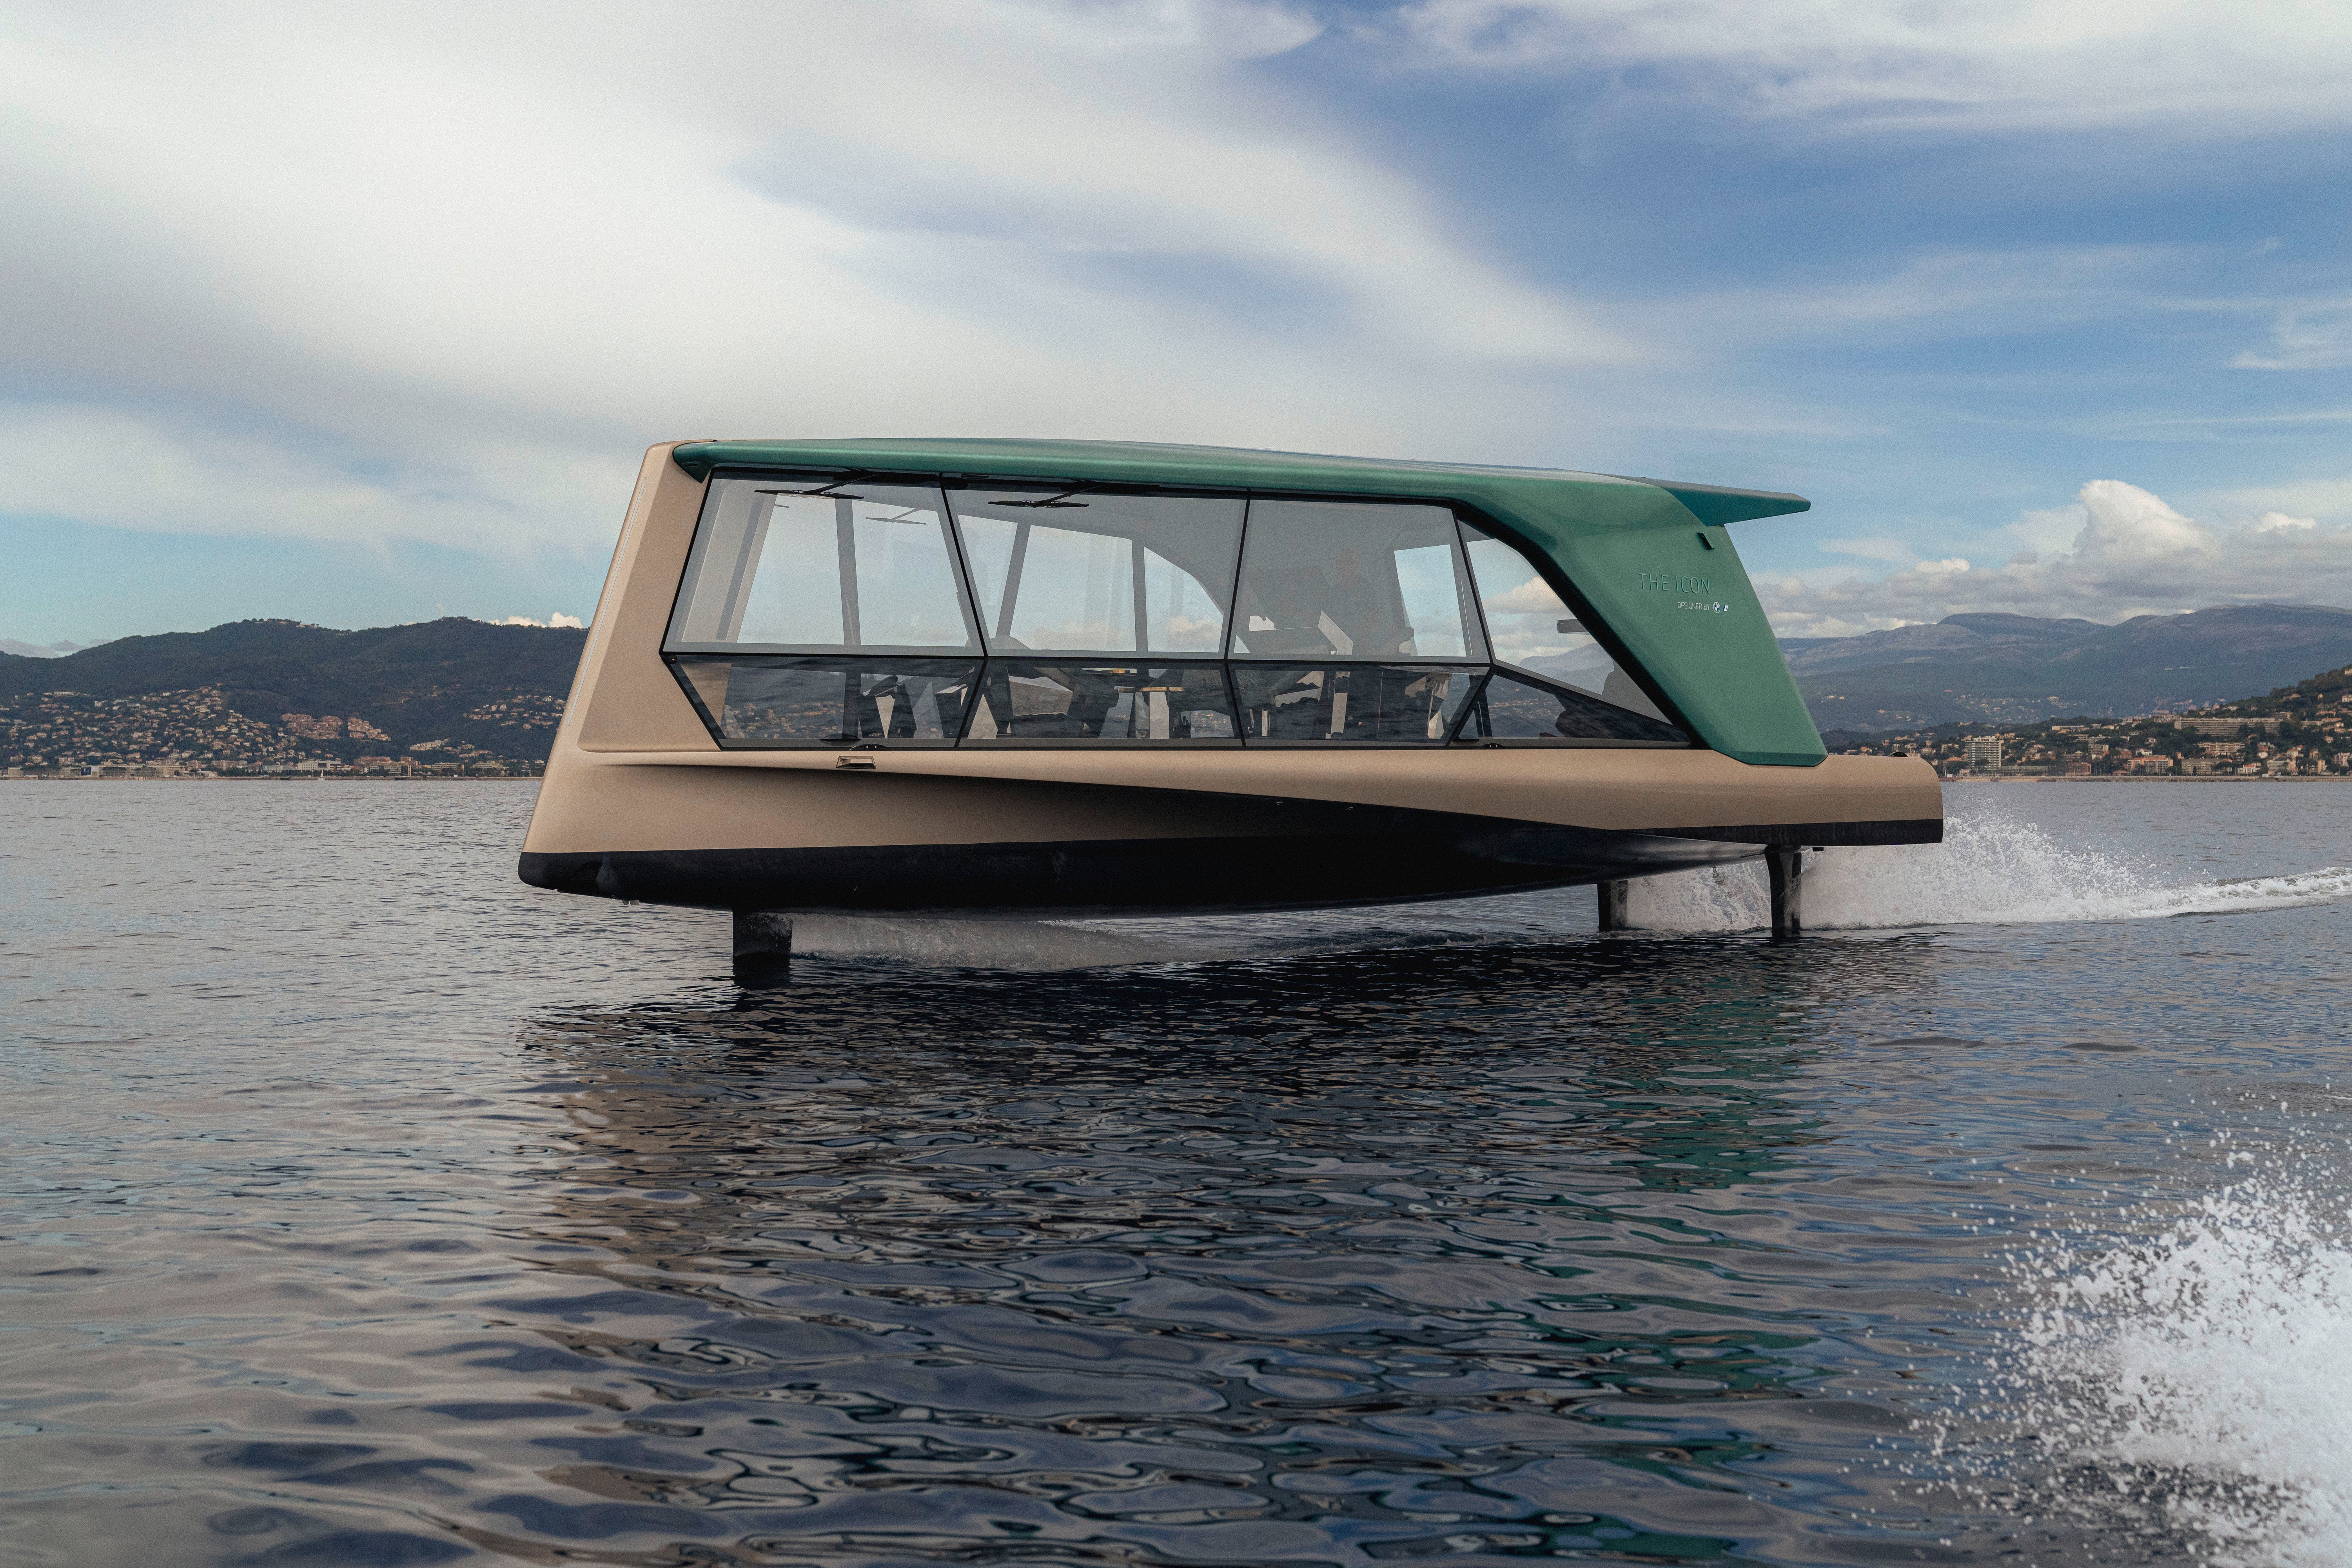 BMW’s Electric Boat Revealed At Cannes Is Certainly A BMW Thing